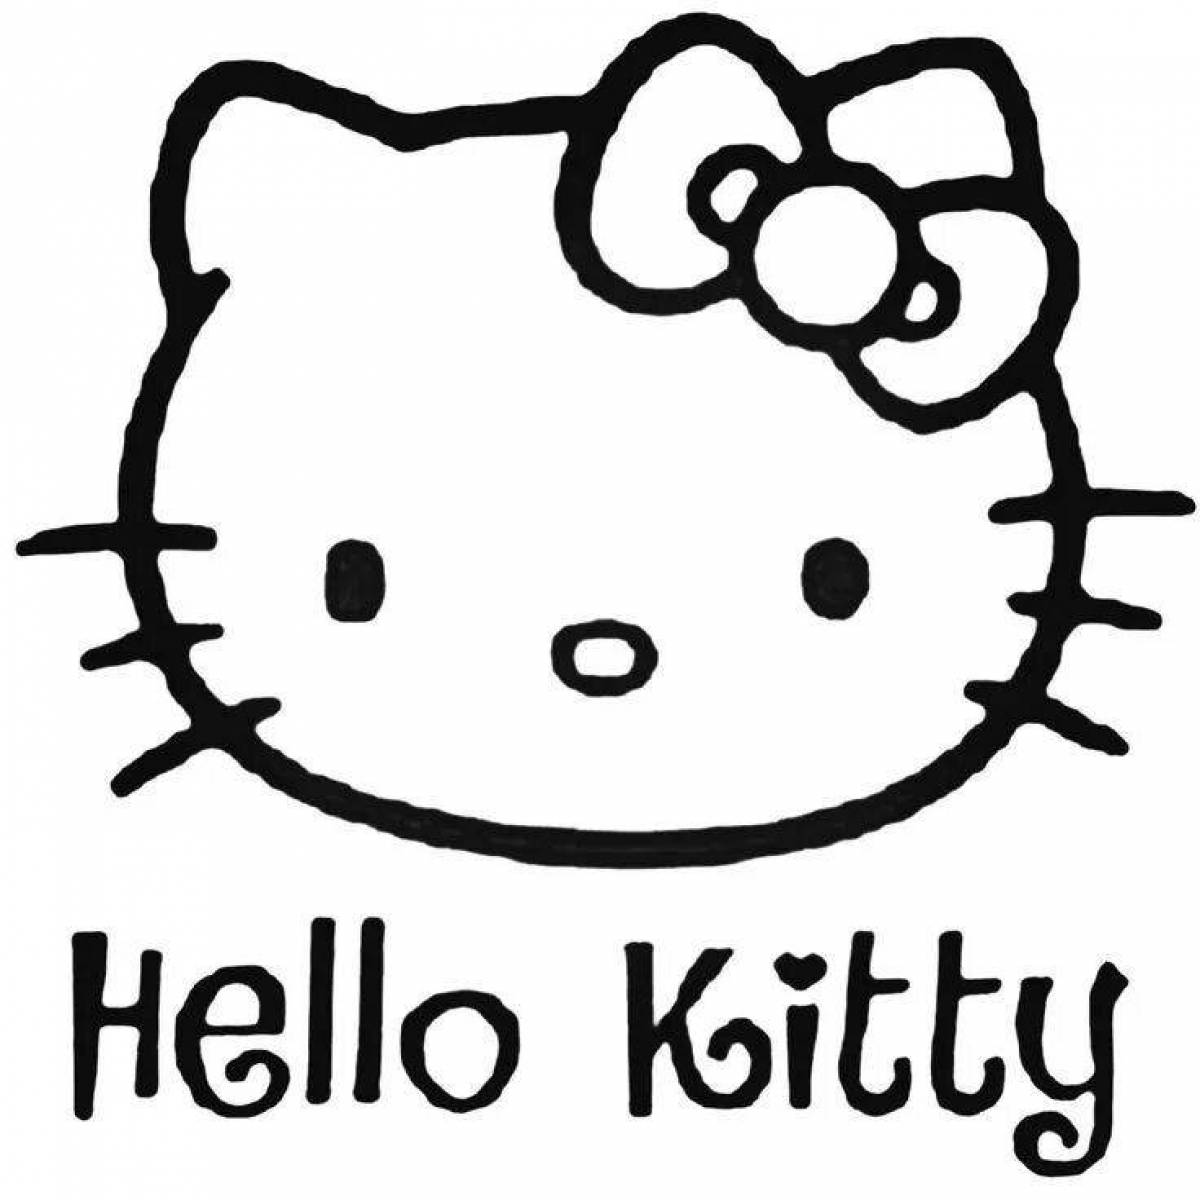 Awesome hello kitty poster